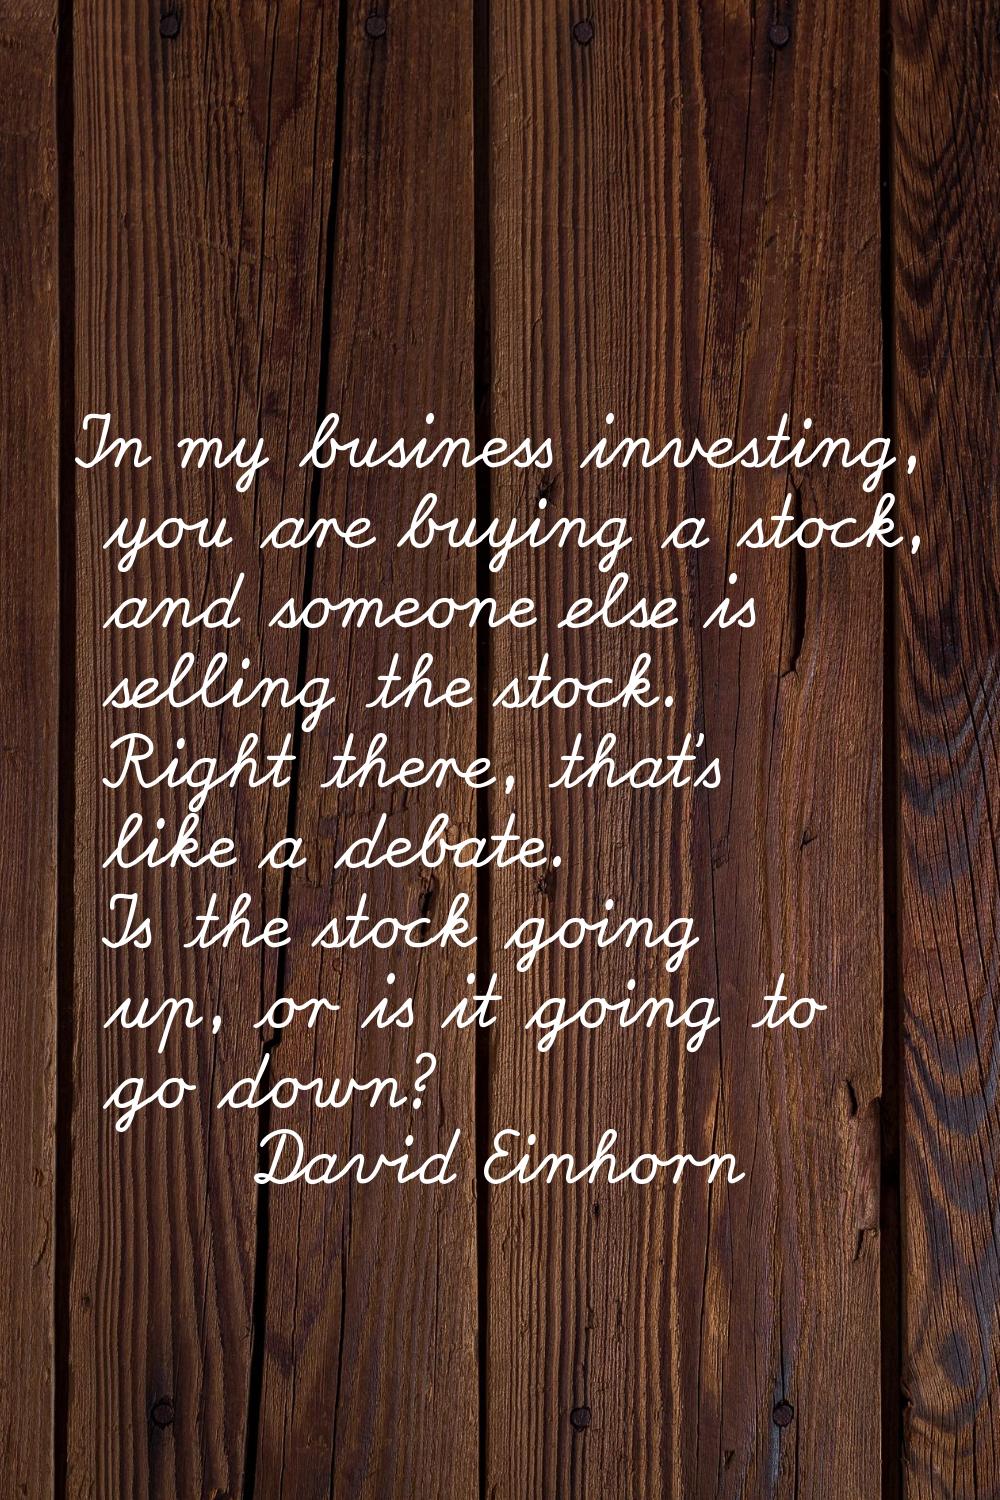 In my business investing, you are buying a stock, and someone else is selling the stock. Right ther